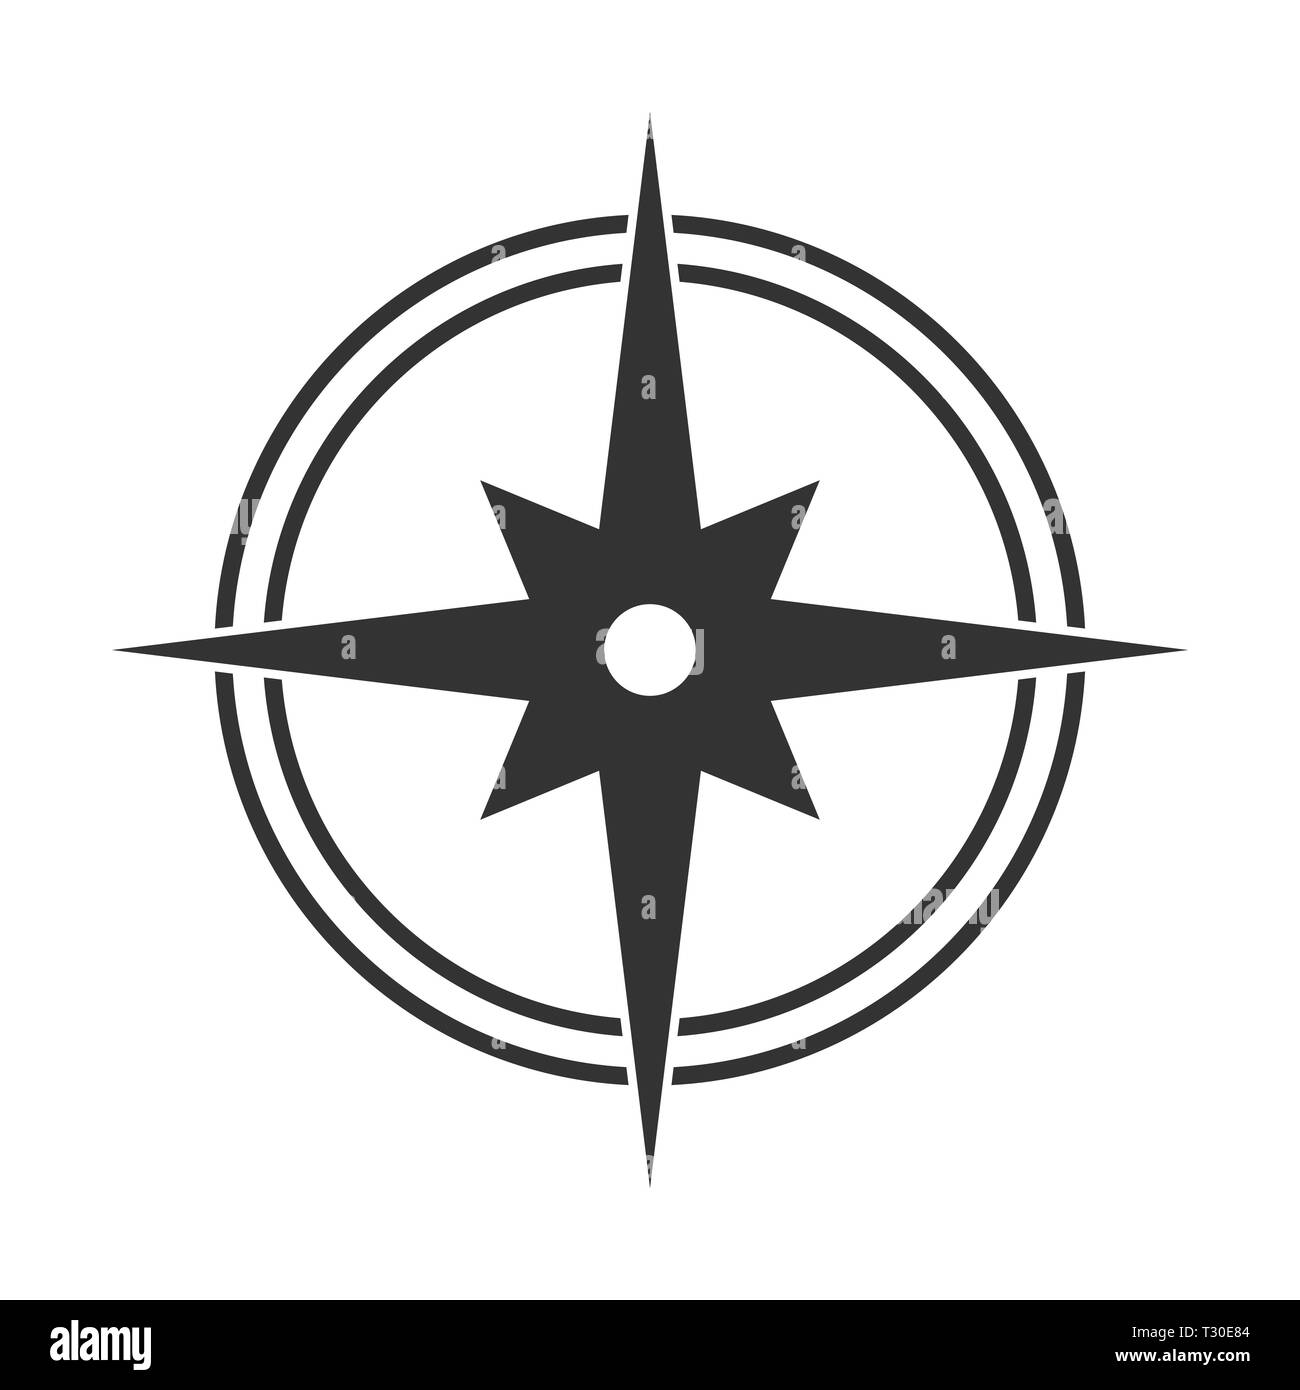 Simple flat icon of a compass, cardinal directions and orienteering Stock Vector